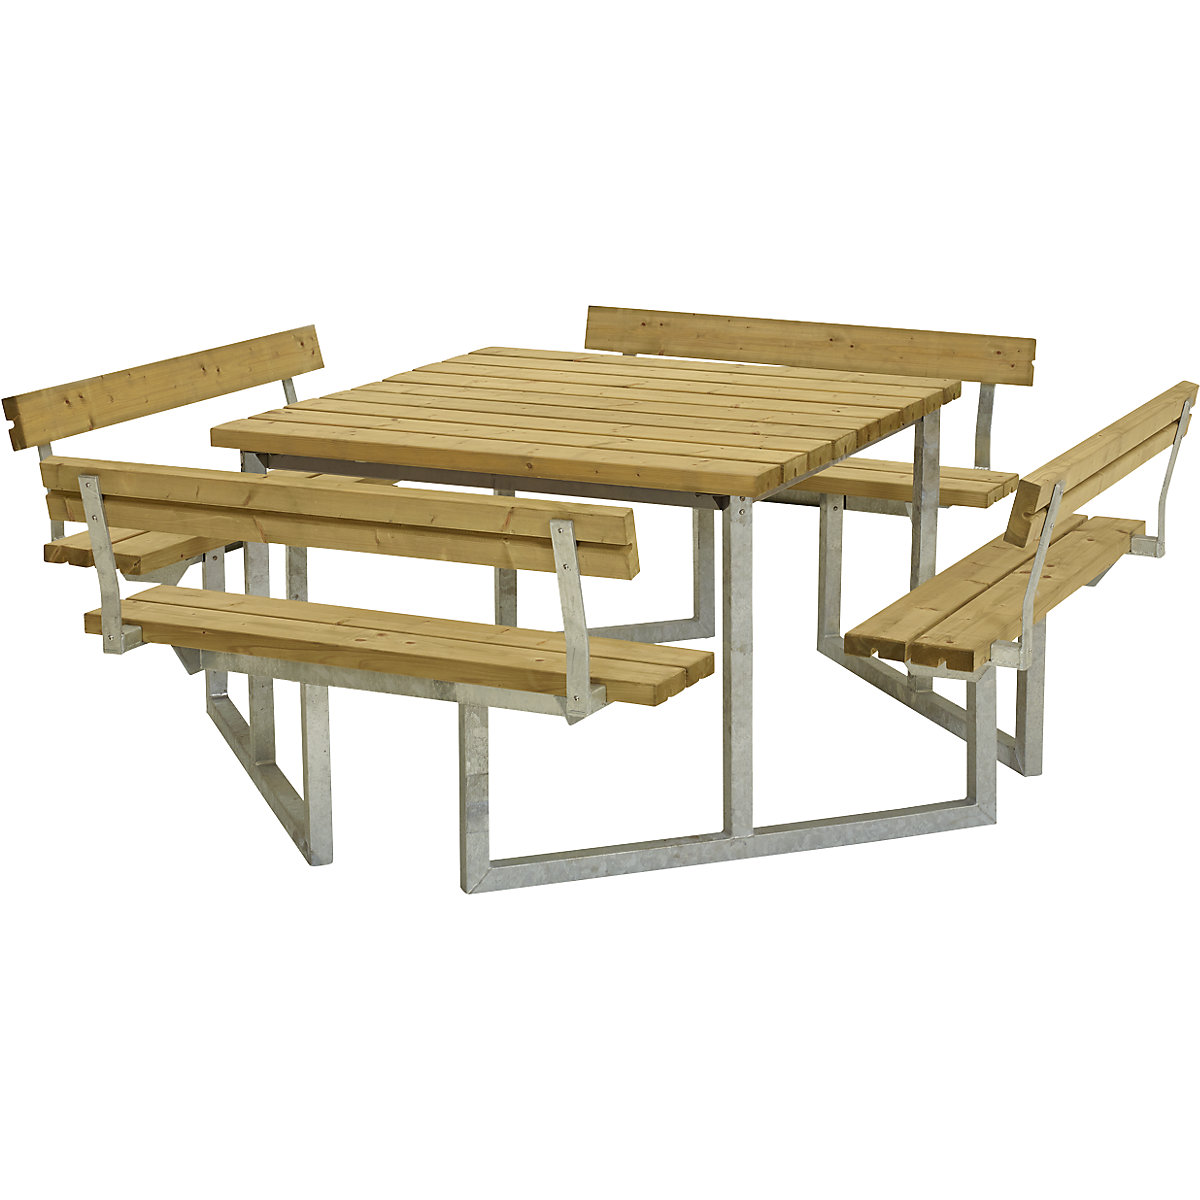 Picnic bench for 8 people, certified pine wood, larch wood, with back rest-8